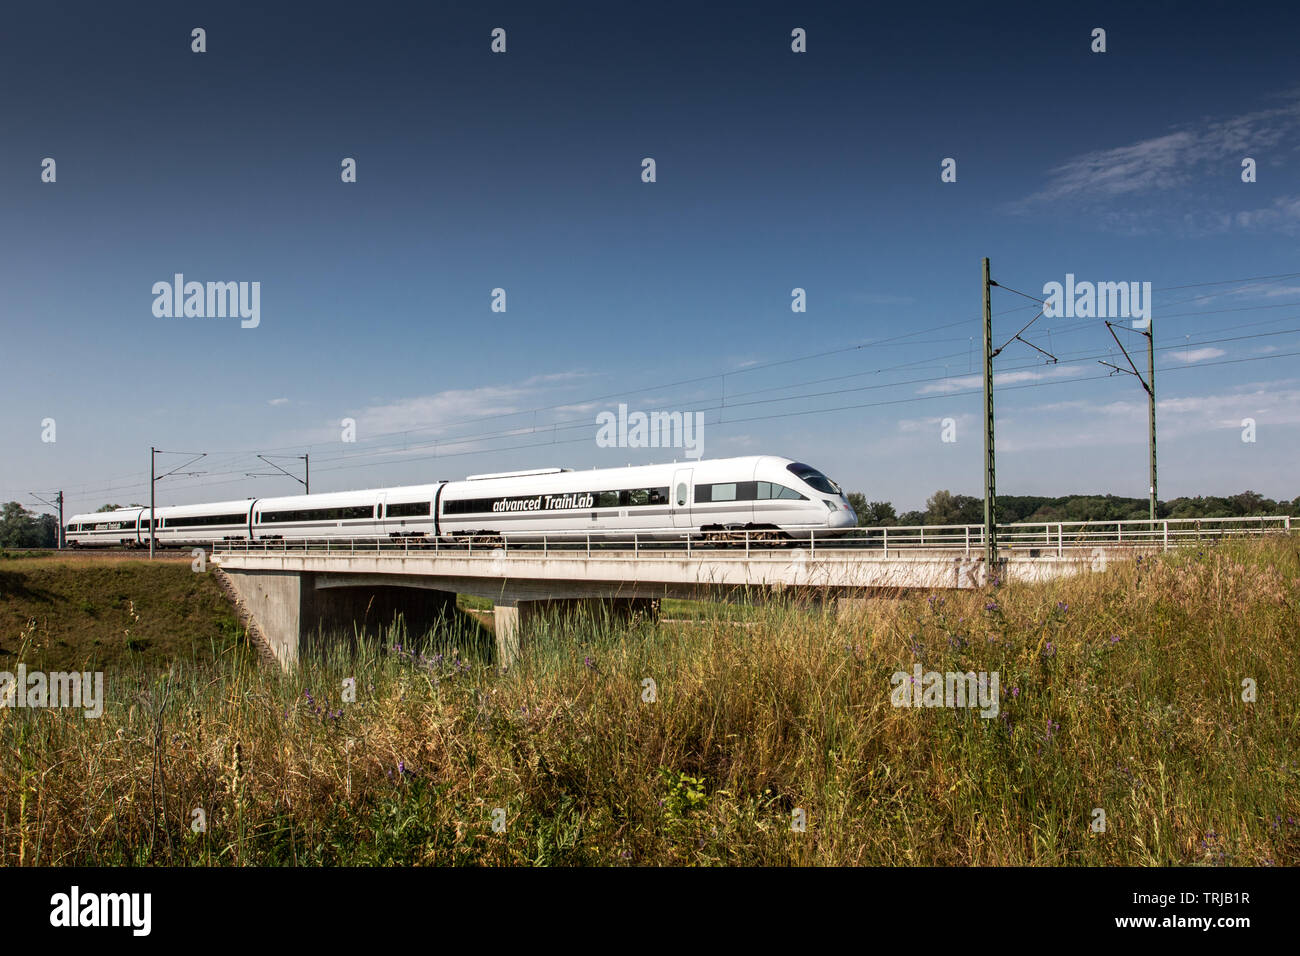 Dessau-Roßlau, Germany, June 5, 2019 - In June 2019, the Advanced TrainLab, a special test train based on a diesel-powered ICE train operated by Deutsche Bahn, is on its way to Berlin. There, the vehicle will do some test drives in driverless operation. This train can be used for a wide variety of experiments, including in the area of the 5G radio network. Stock Photo